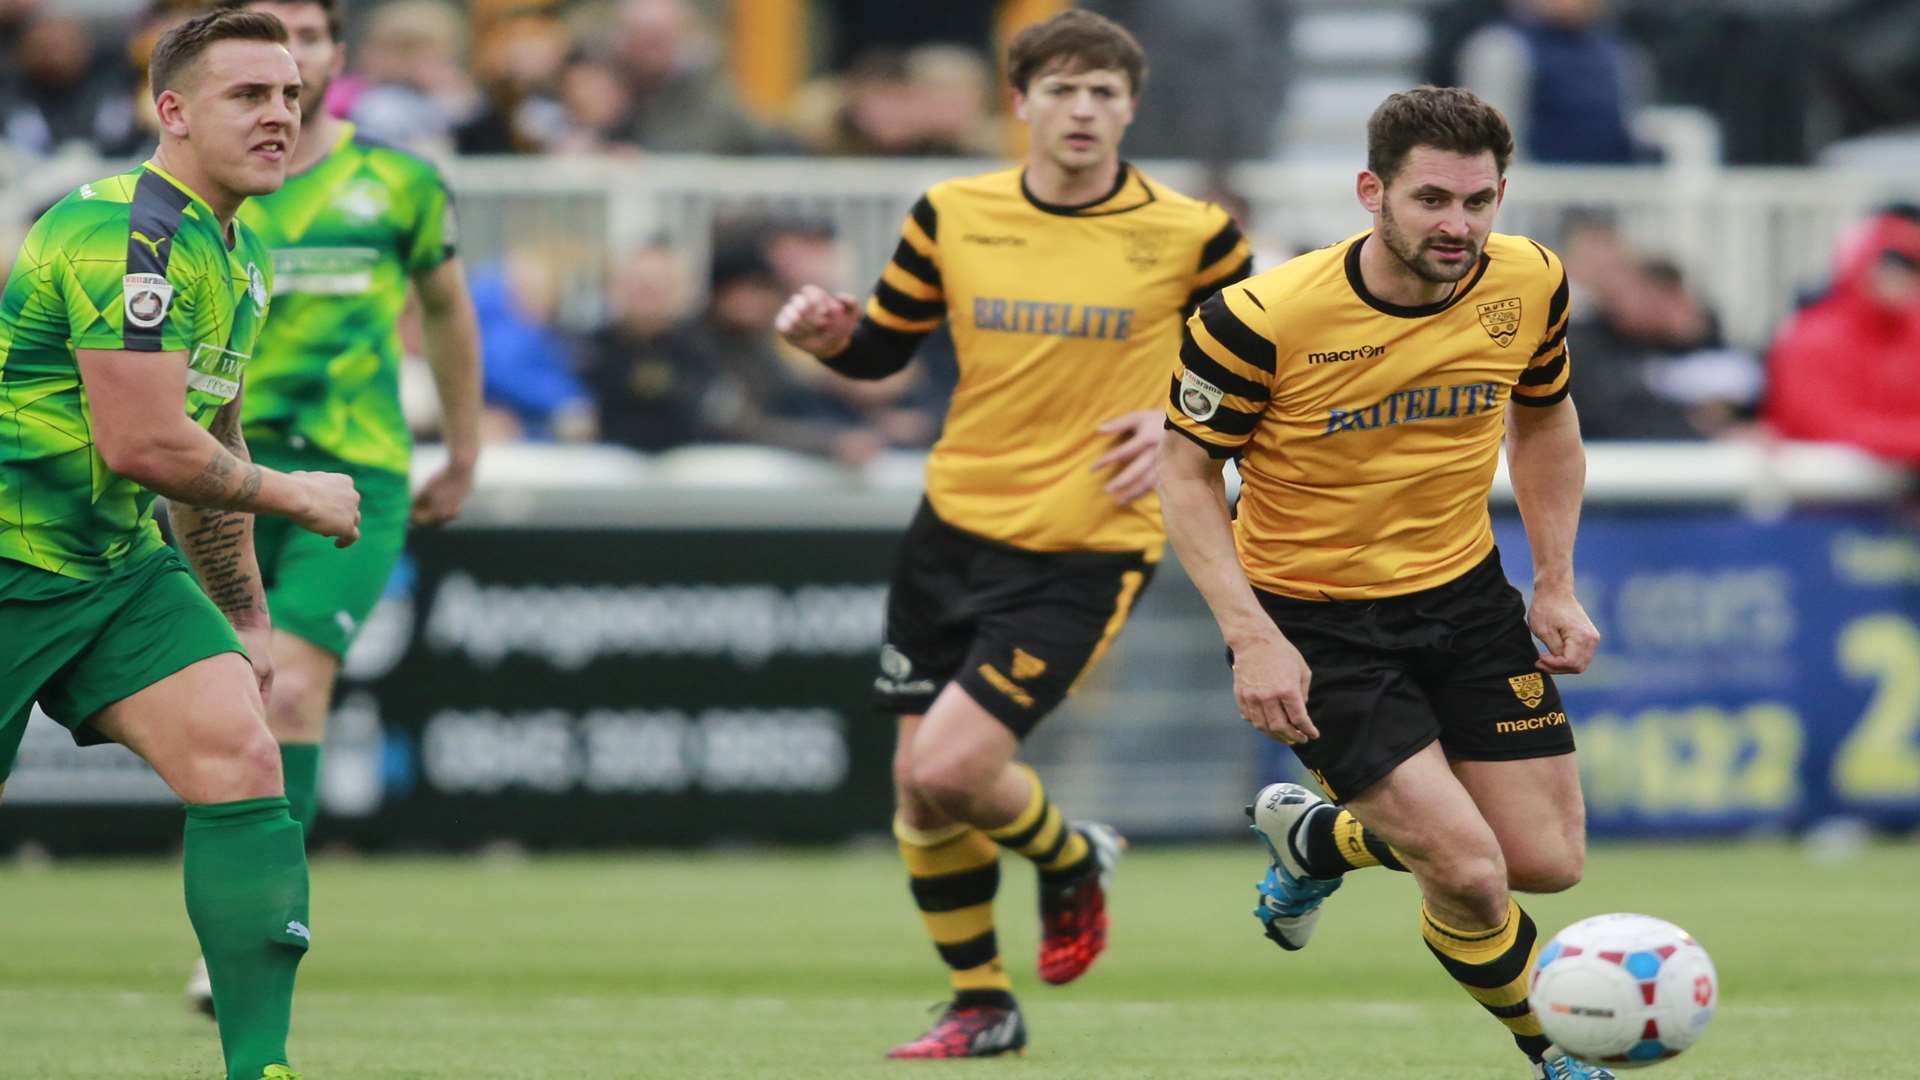 Jay May returns to Maidstone in good form after seven goals for Hastings Picture: Martin Apps